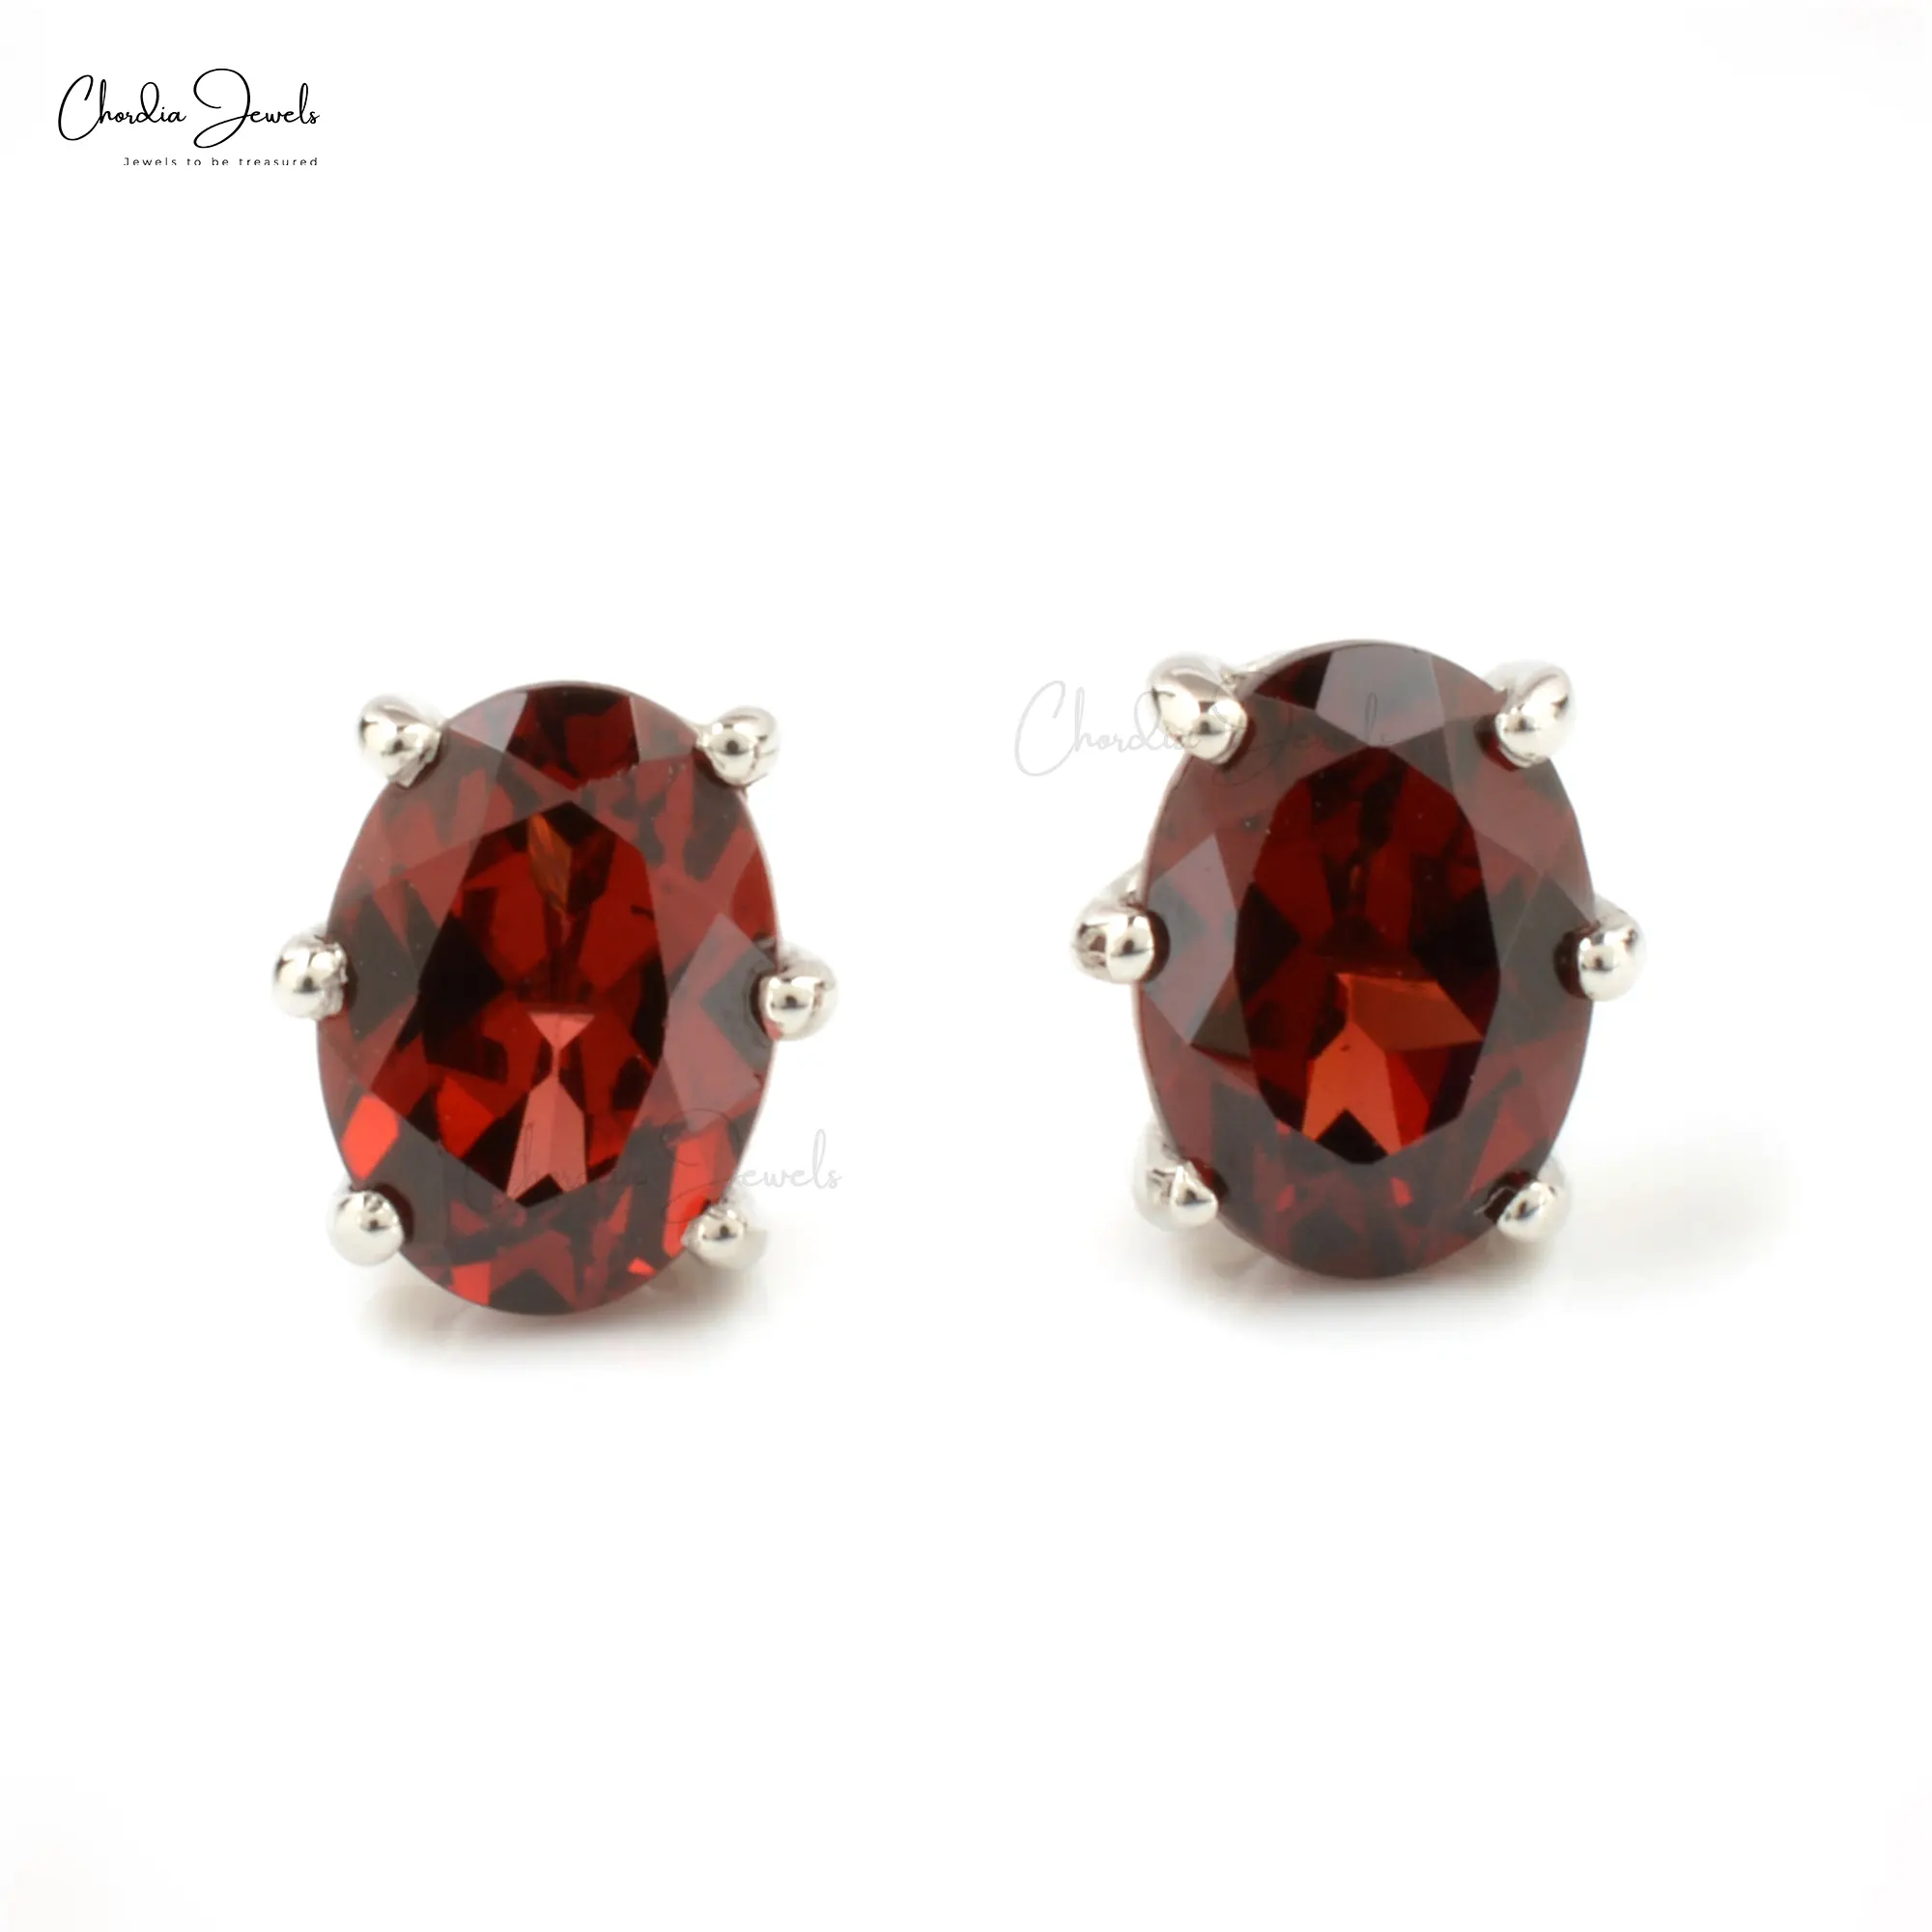 Natural Red Garnet 6x4mm Oval Cut Prong Set Gemstone Studs High Quality 925 Sterling Silver Trendy Fashion Jewelry Wholesaler